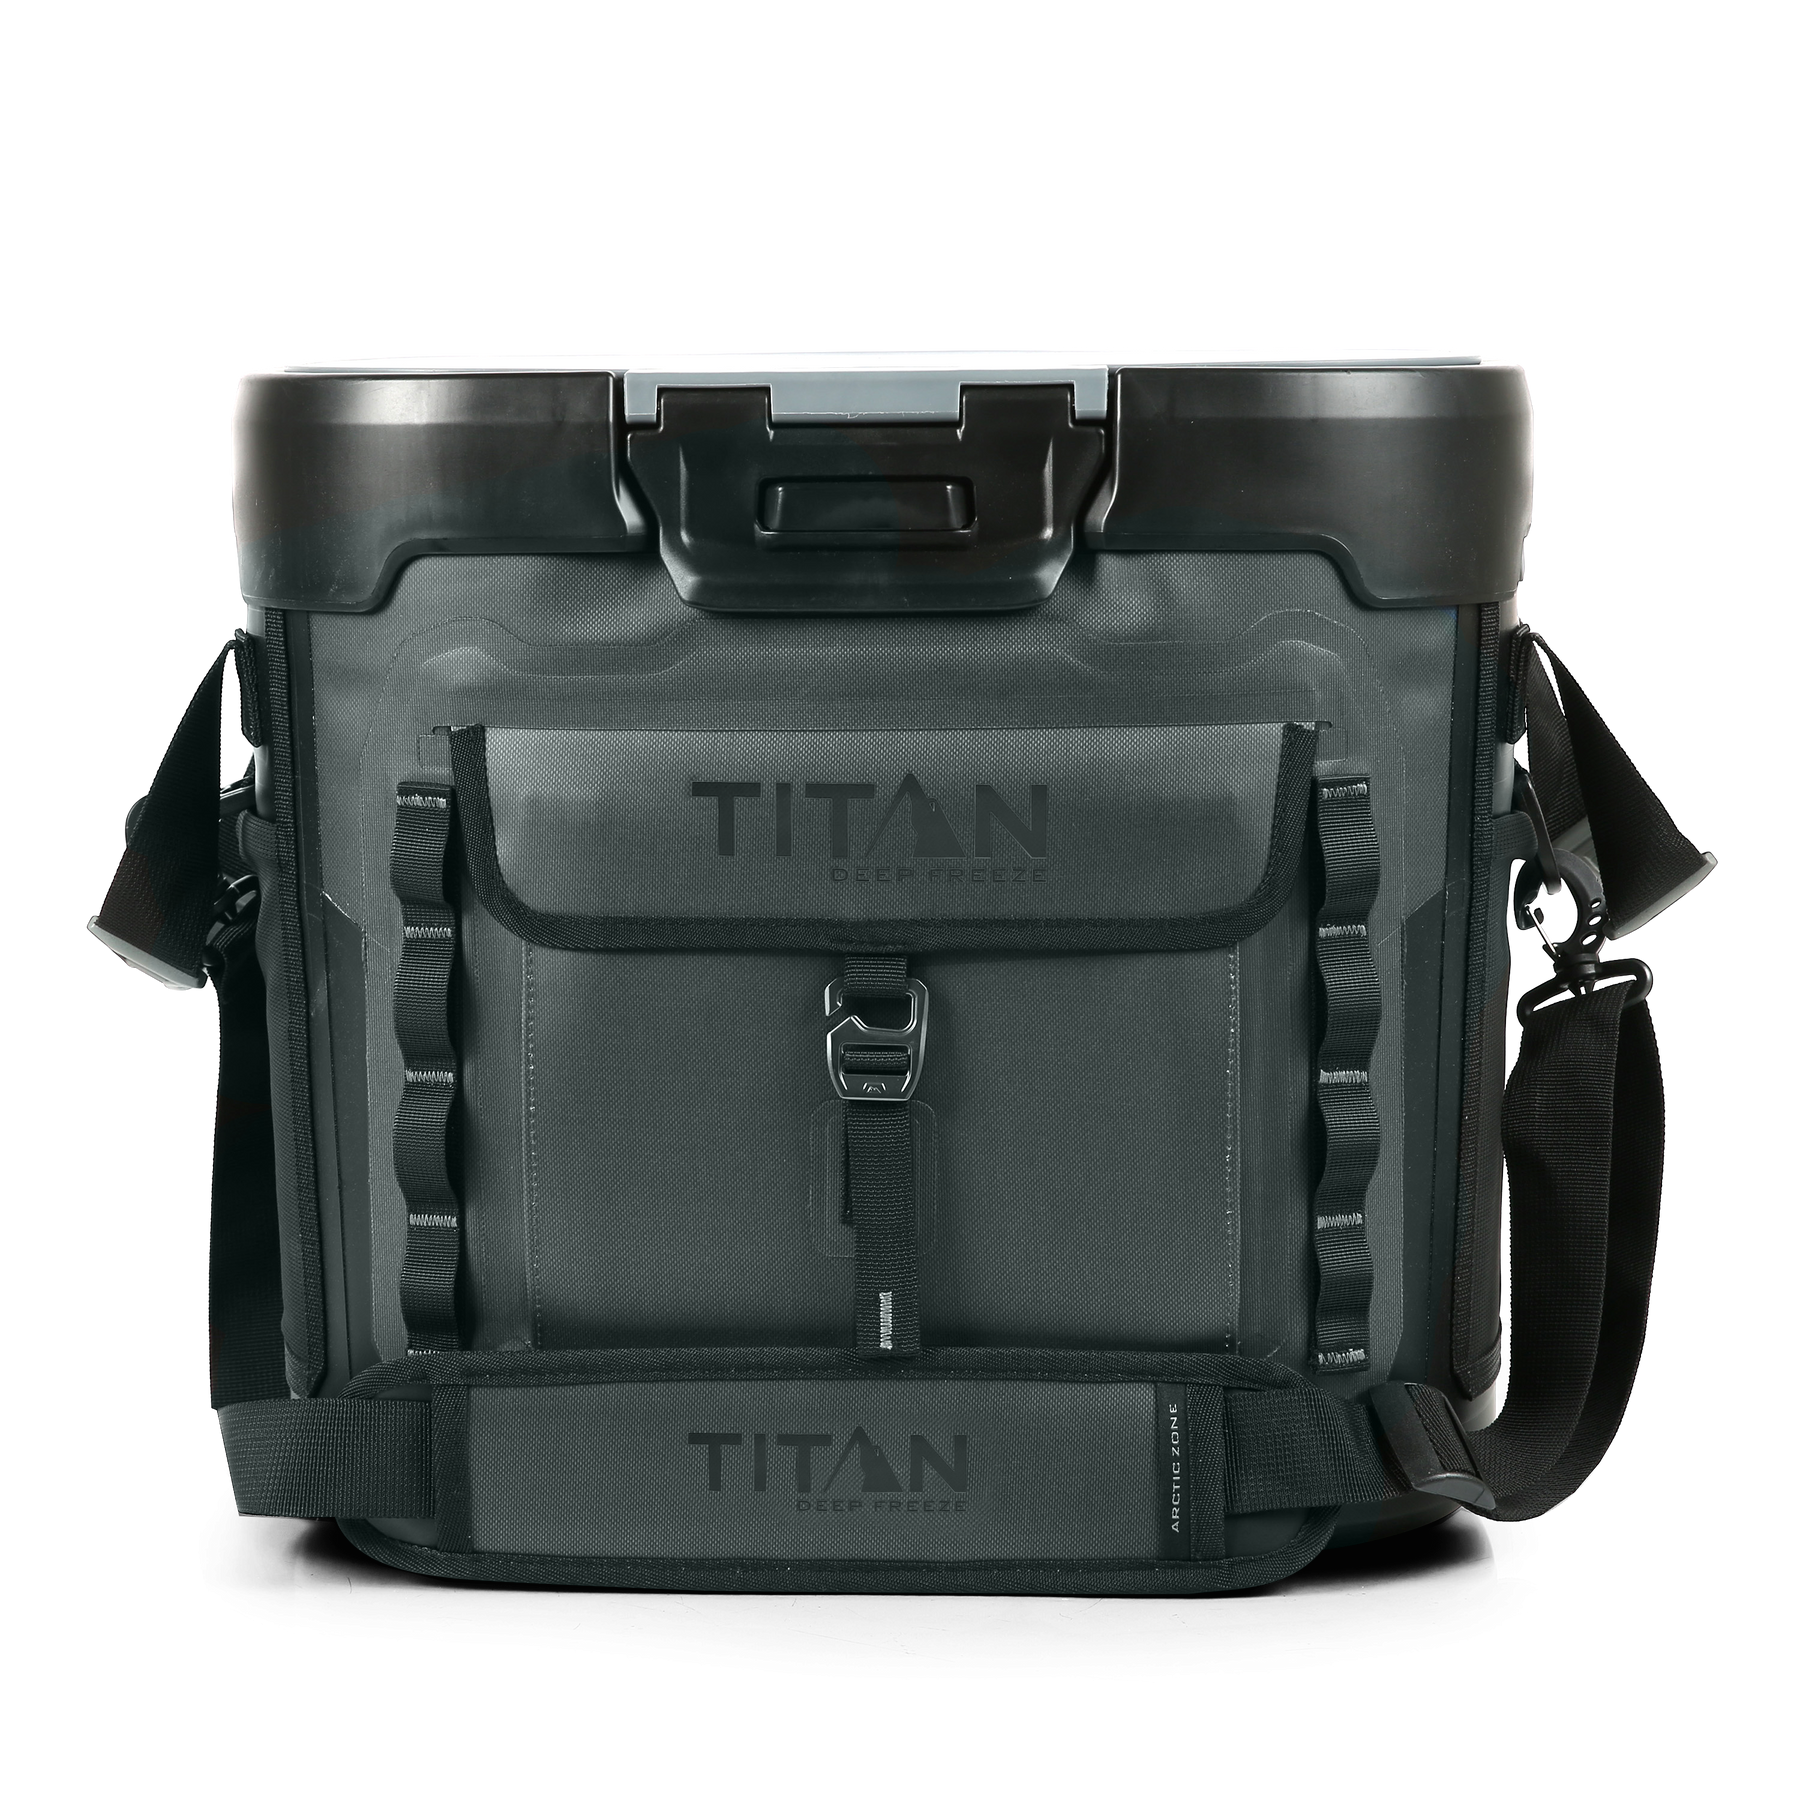 Arctic Zone 36 Can Titan Guide Series Cooler